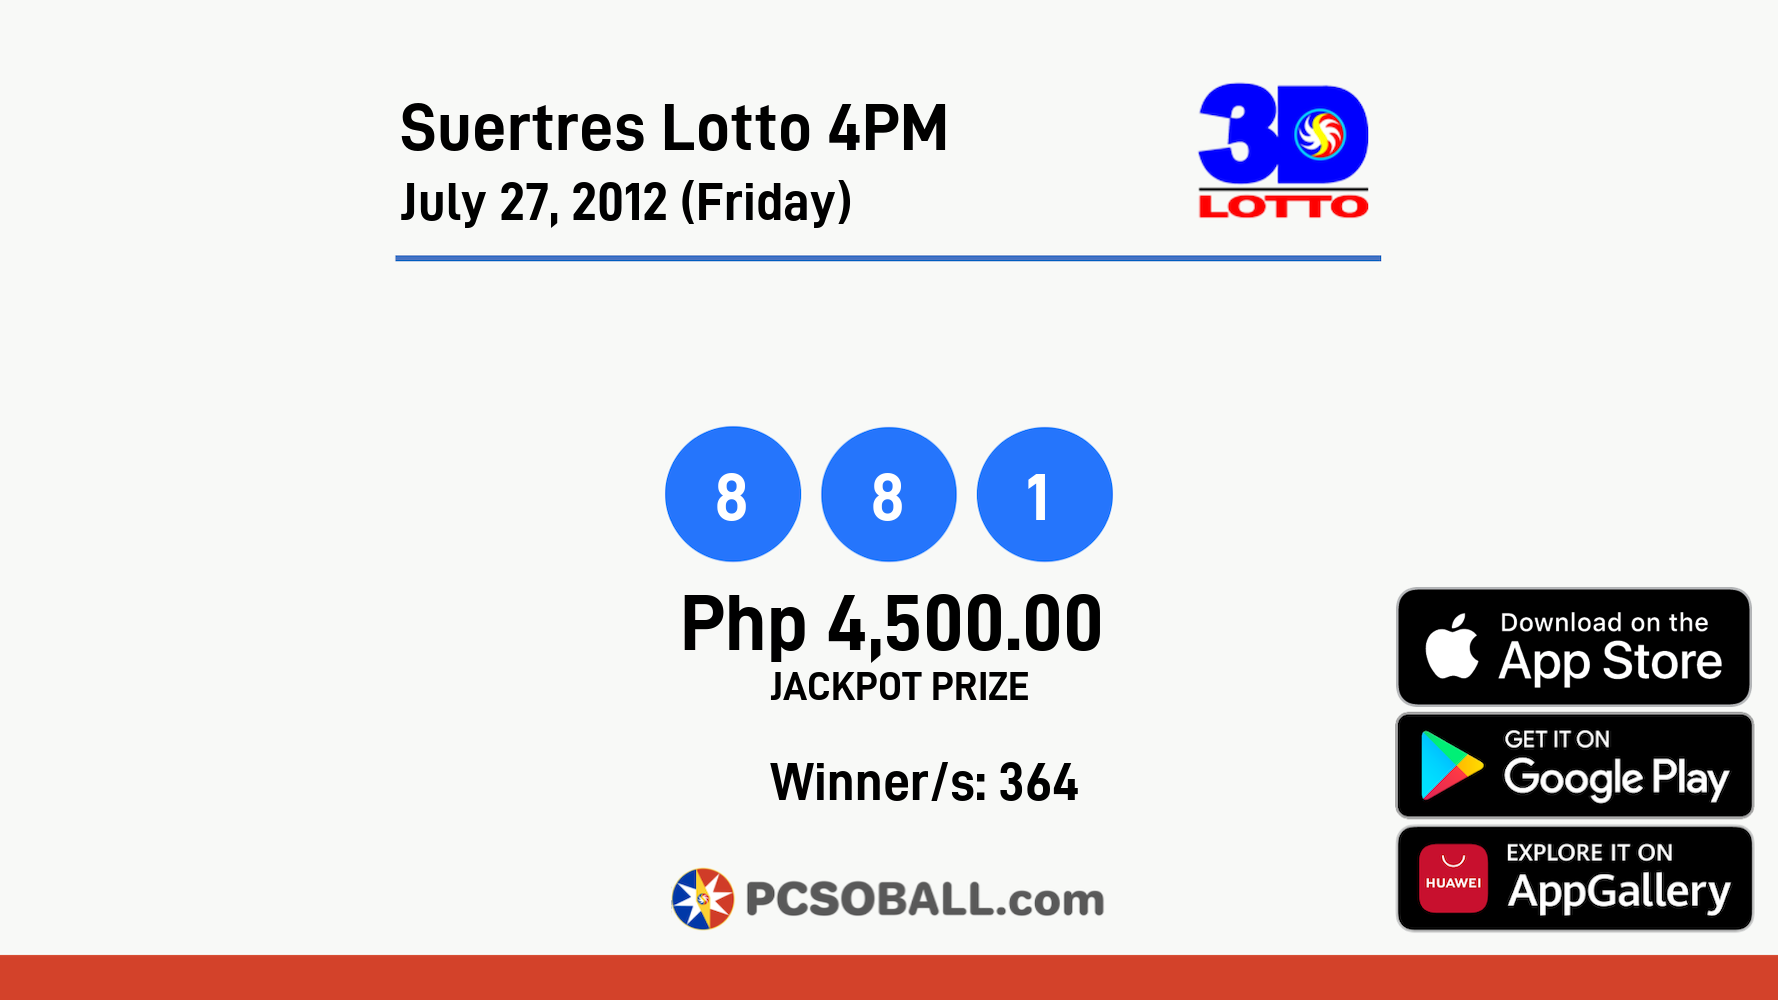 Suertres Lotto 4PM July 27, 2012 (Friday) Result